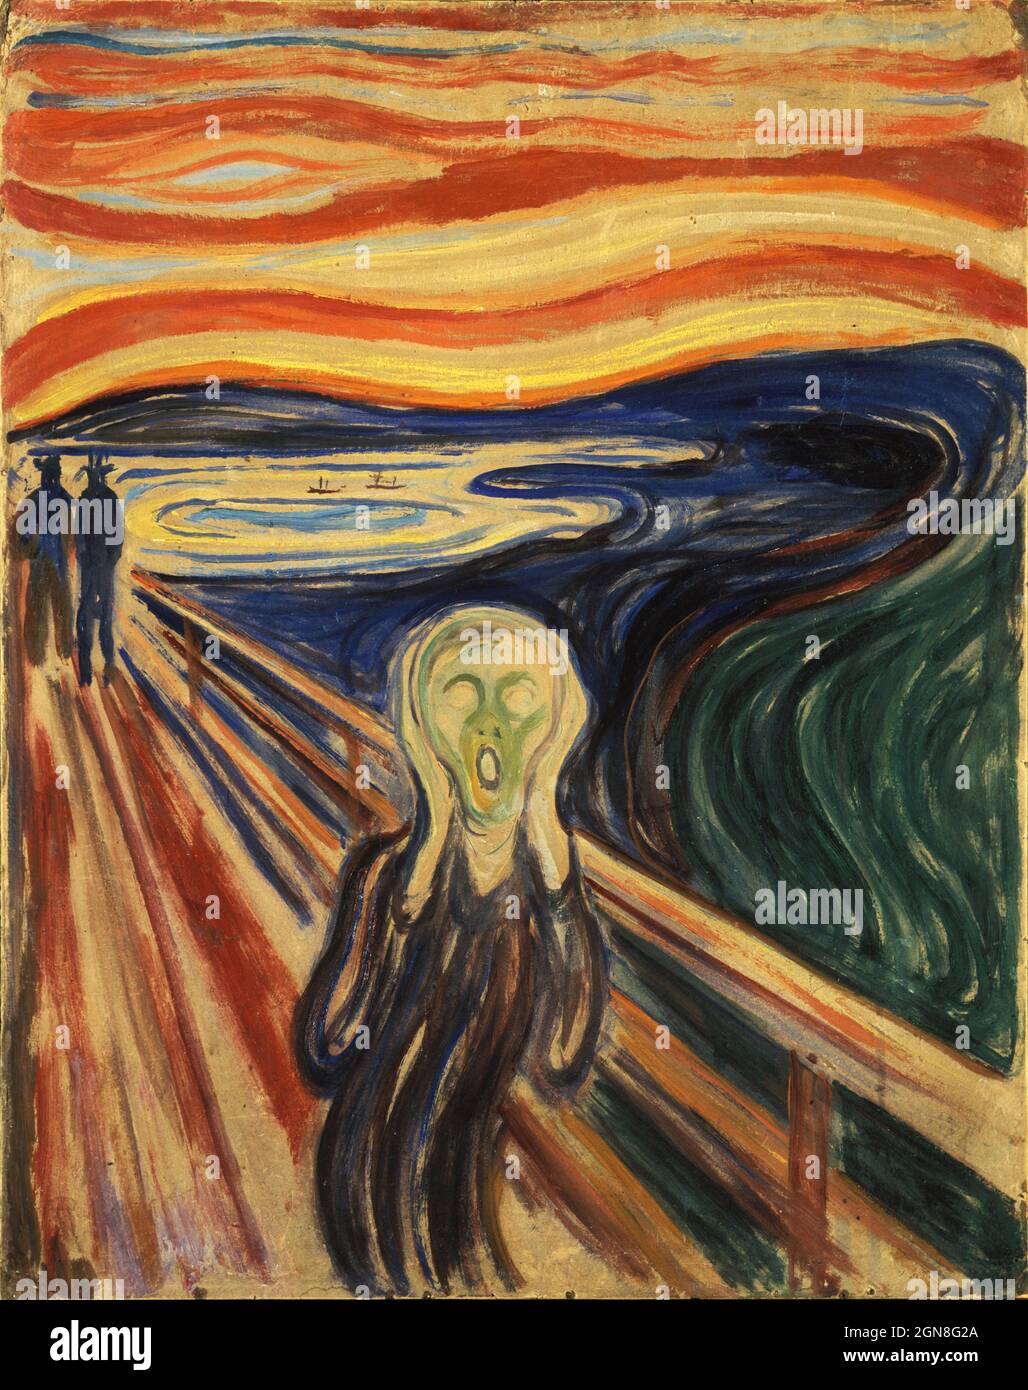 The Scream, by Edvard Munch. This version, executed in 1910 in tempera on cardboard, was stolen from the Munch Museum in 2004, and recovered in 2006. Stock Photo